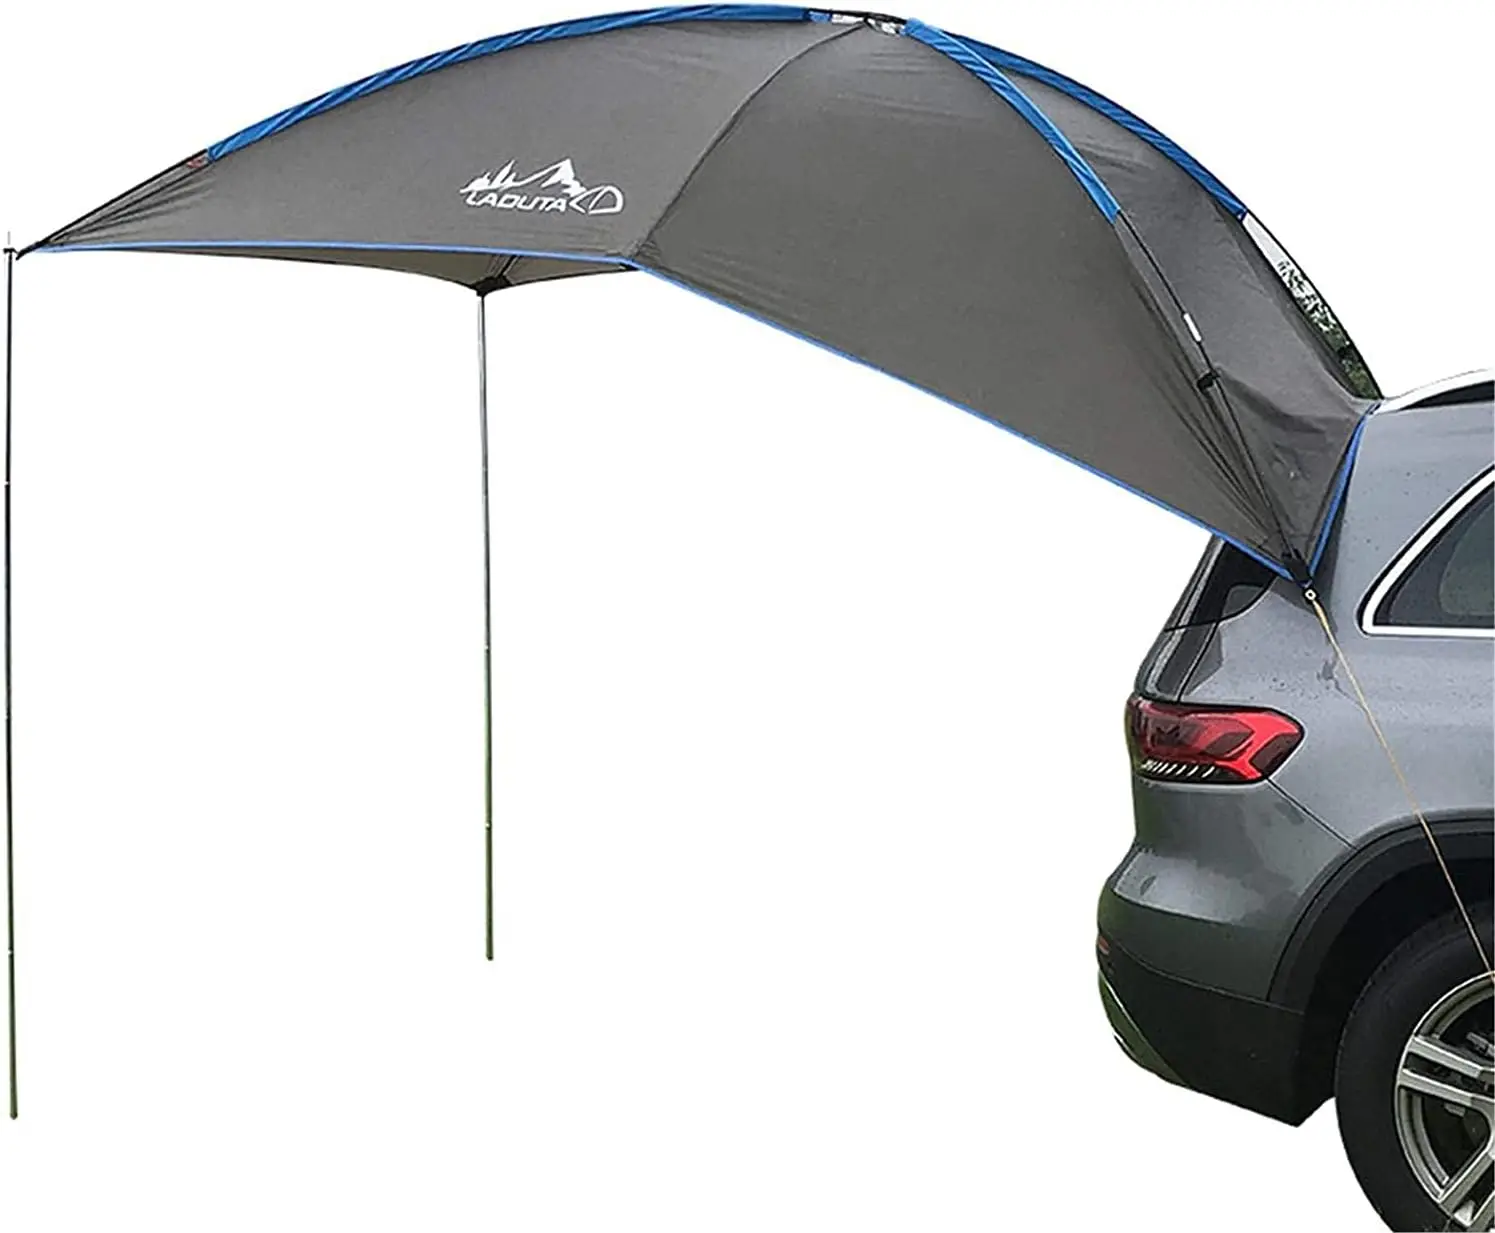 

Tailgate Tent with Awning Shade, Waterproof Car Camping Sun Shelter, Portable Auto Canopy Camper Trailer Sun Shade for Camping,